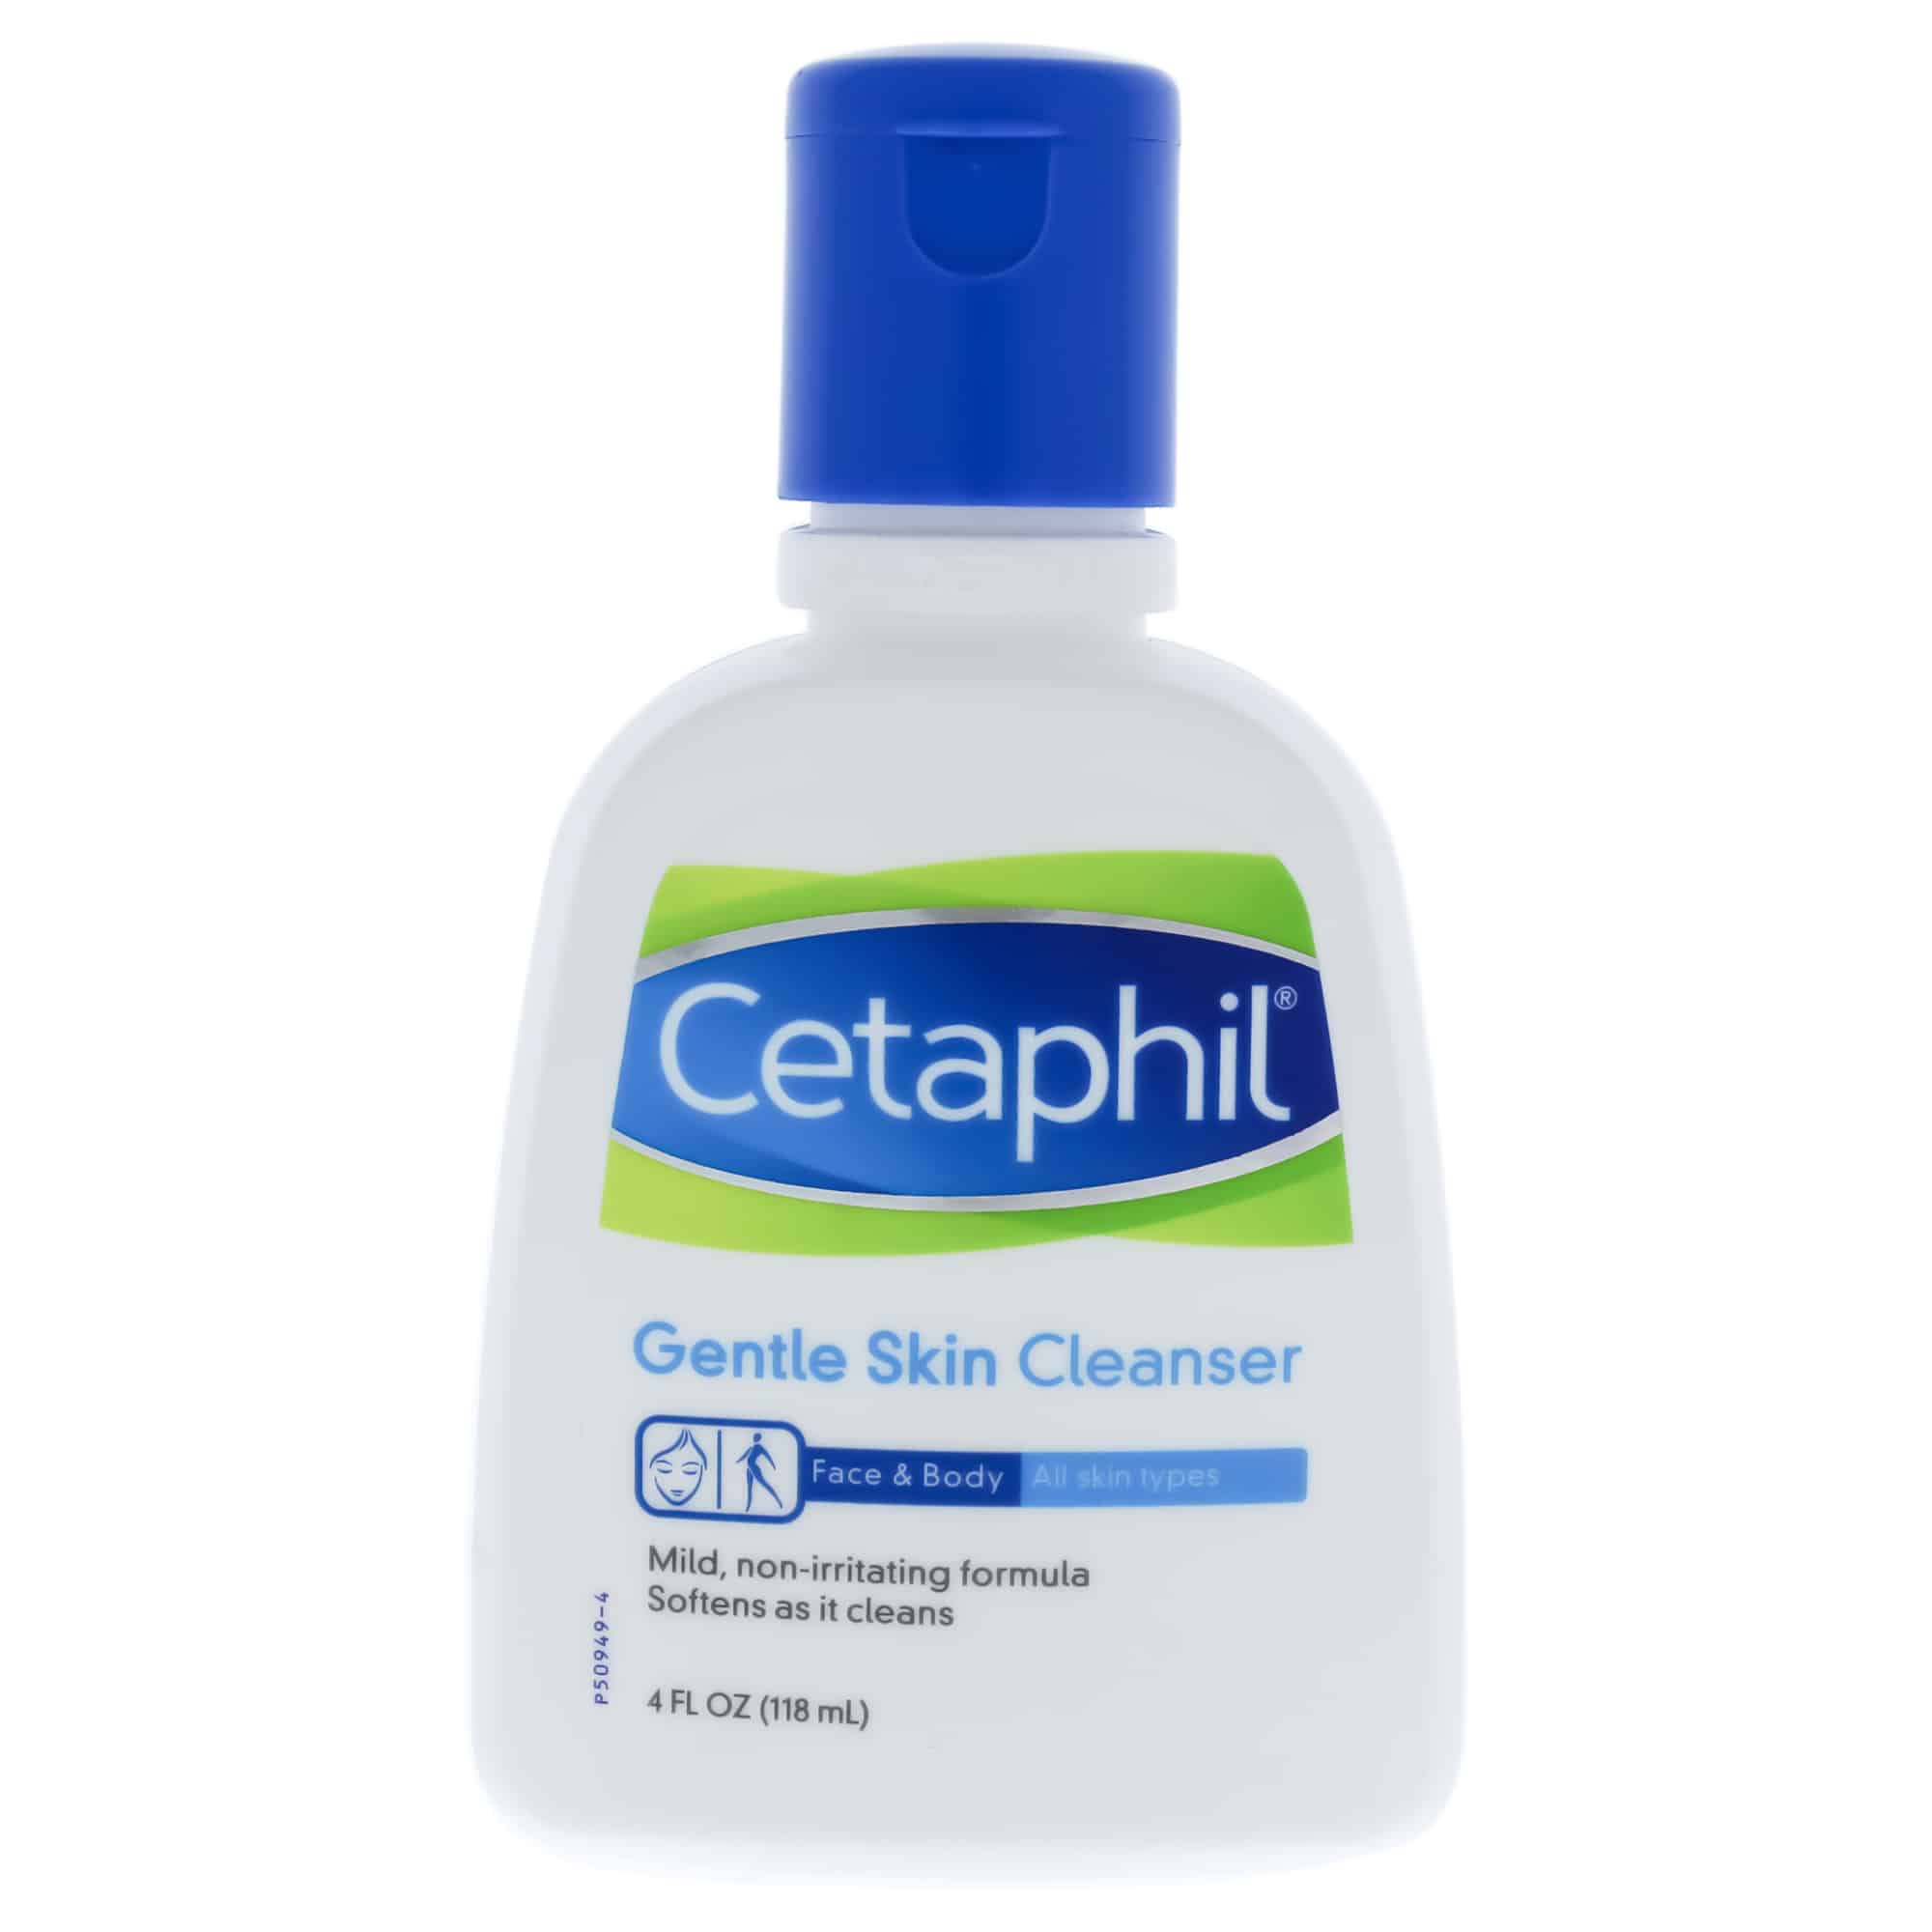 Gentle Skin Cleanser by Cetaphil for Unisex